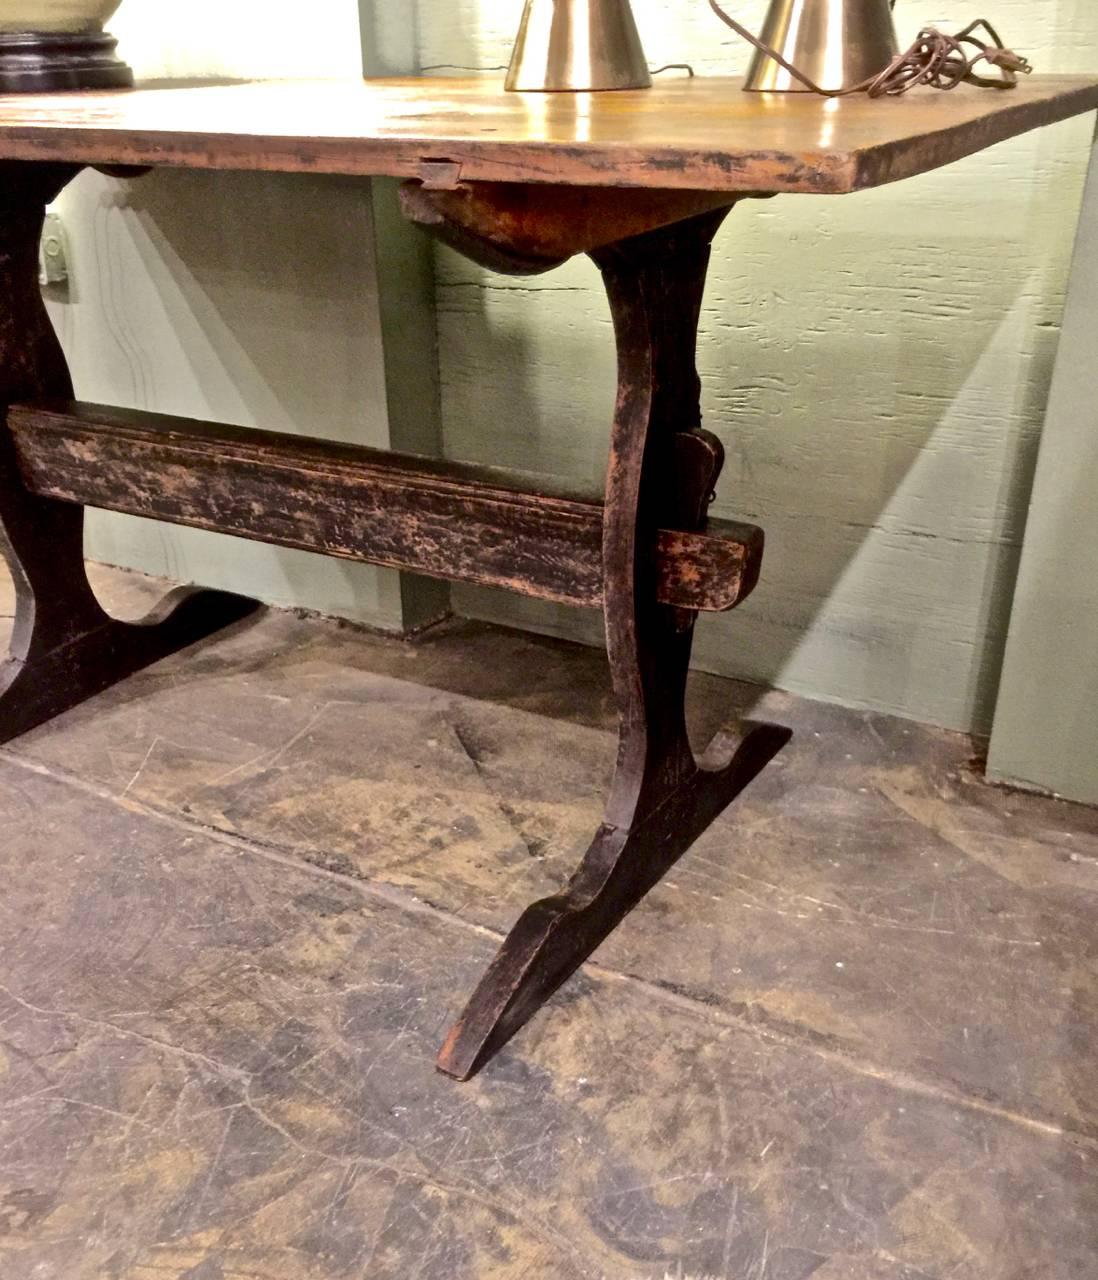 The is an iconic late 18th-early 19th century Swedish trestle table. The table is in overall very good to excellent condition. It retains much of its black painted surface. The two board top and deep natural patina is an indication of its age. The